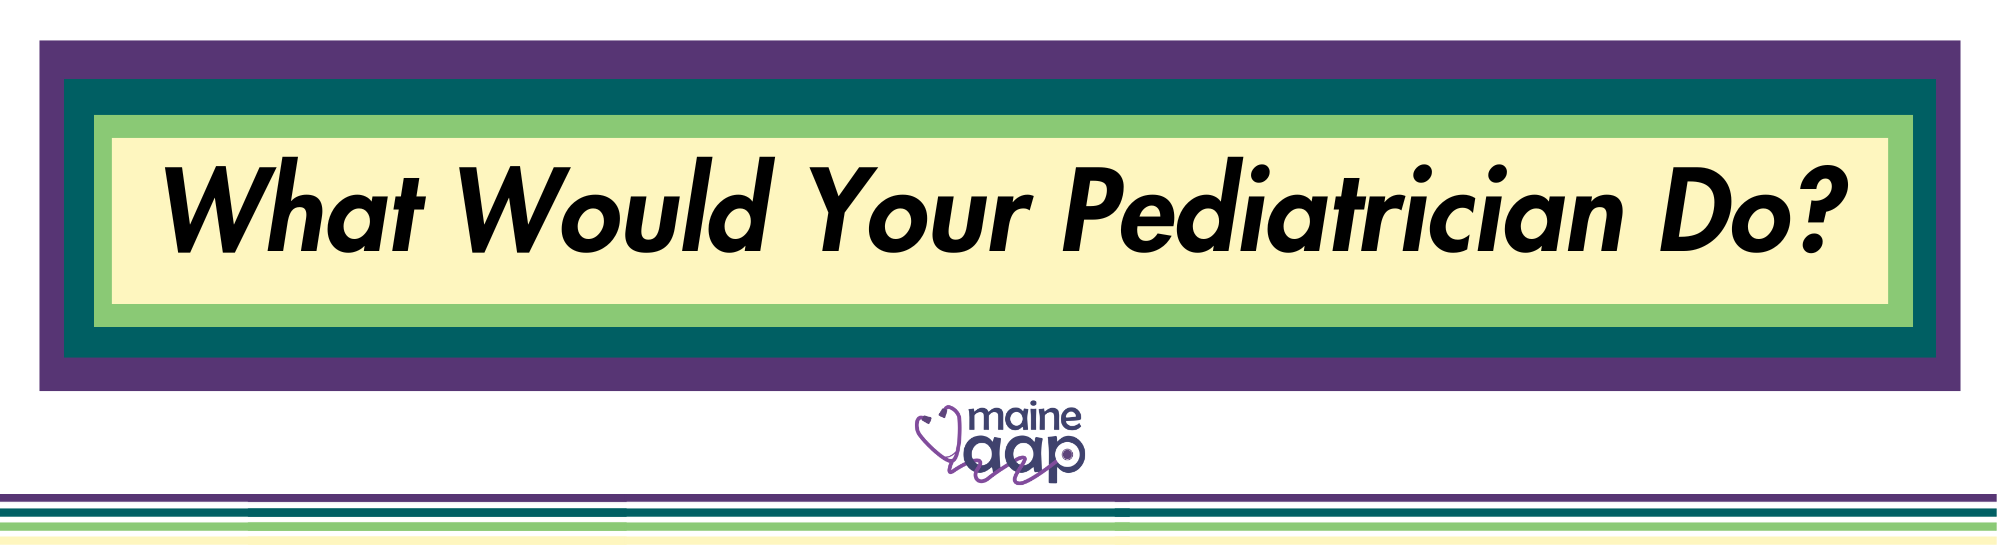 What Would Your Pediatrician Do Bumper Sticker 3